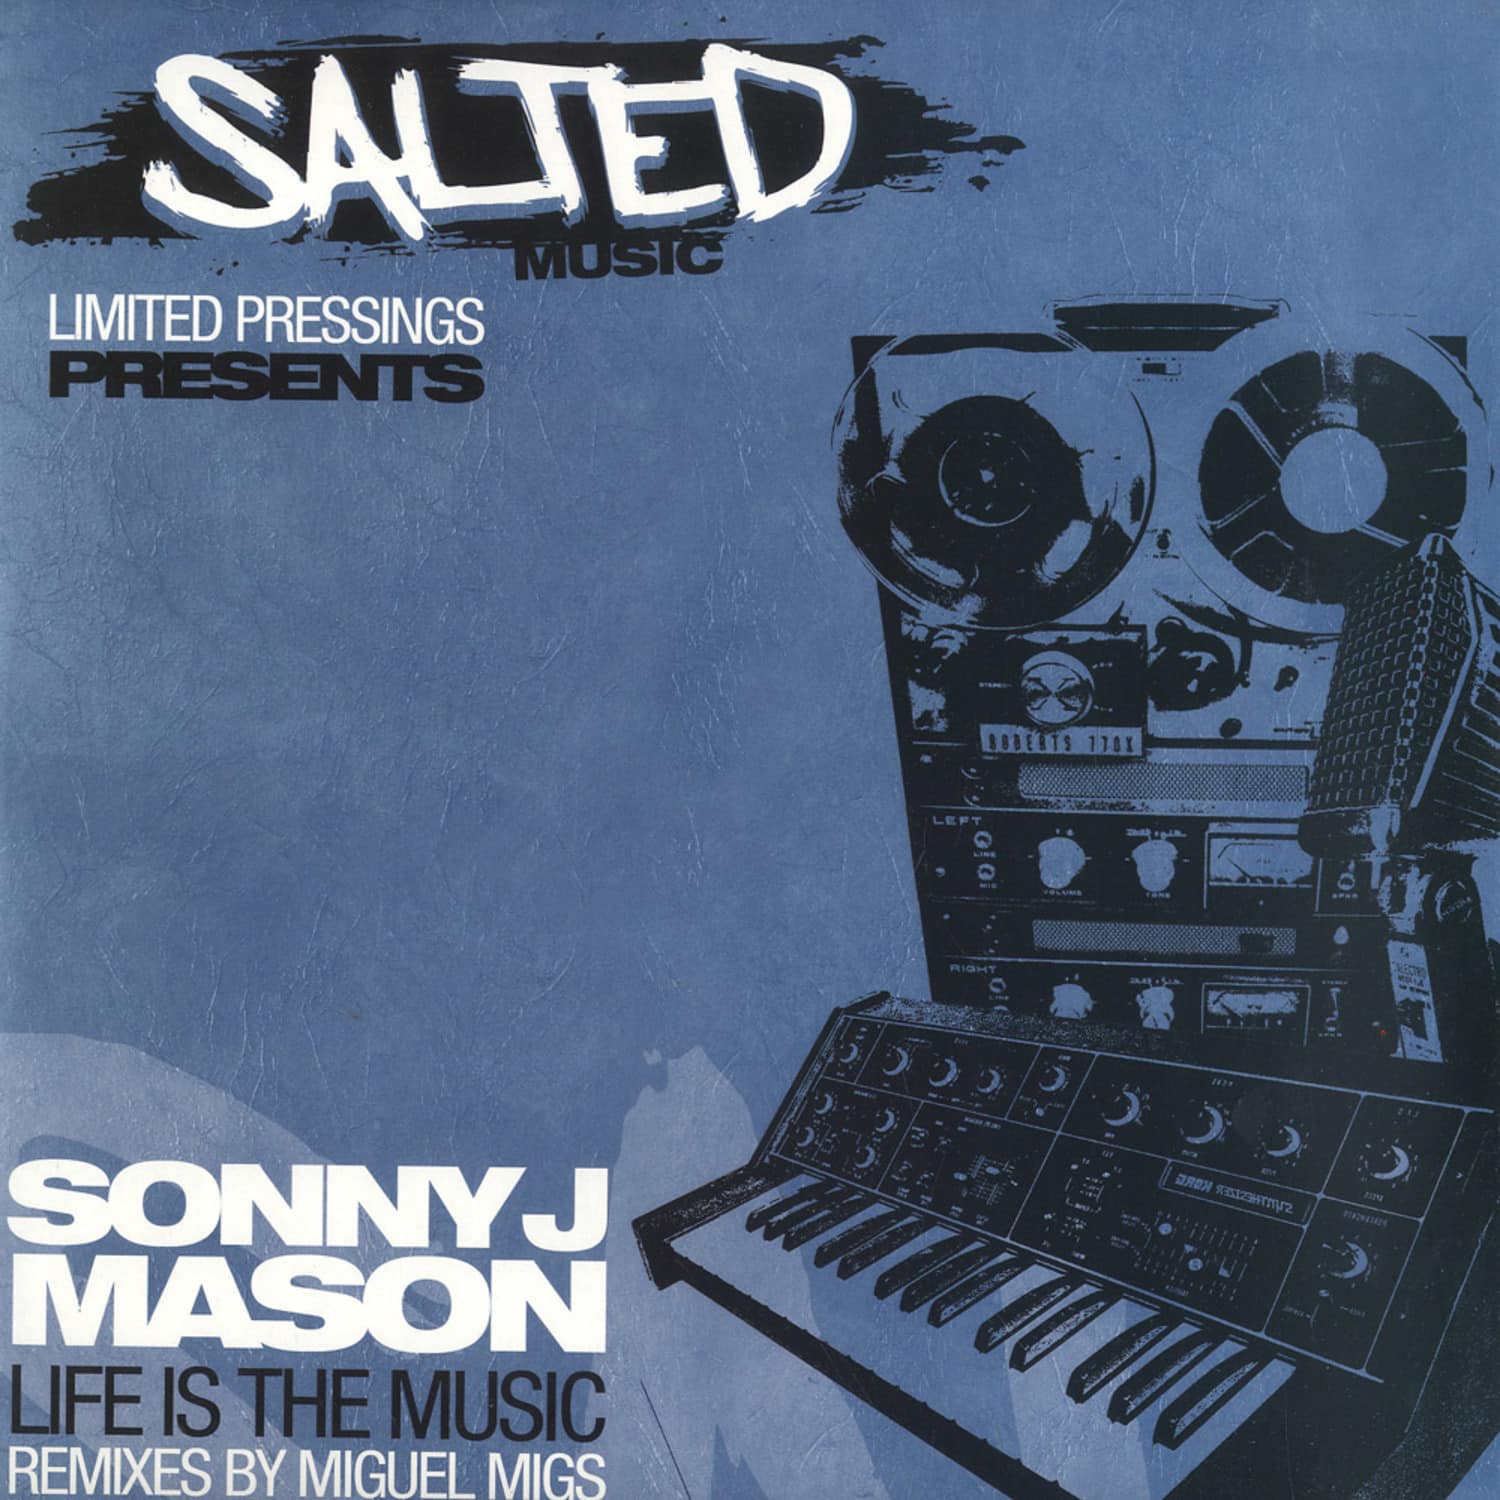 Sonny J Mason - LIFE IS THE MUSIC - MIGUEL MIGS REMIX